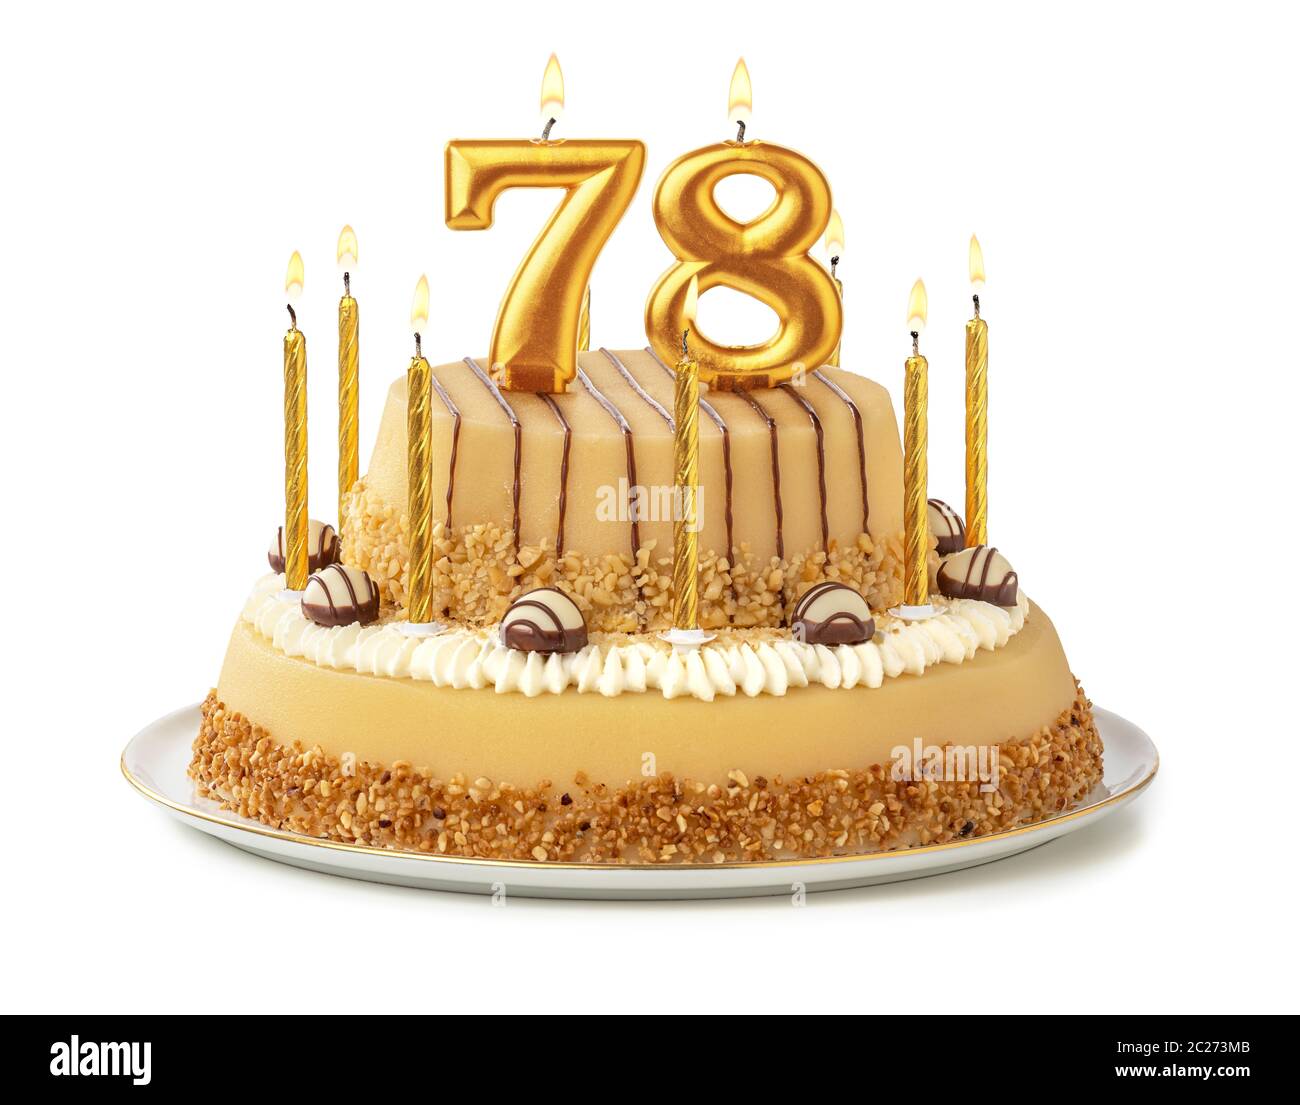 Festive cake with golden candles - Number 78 Stock Photo